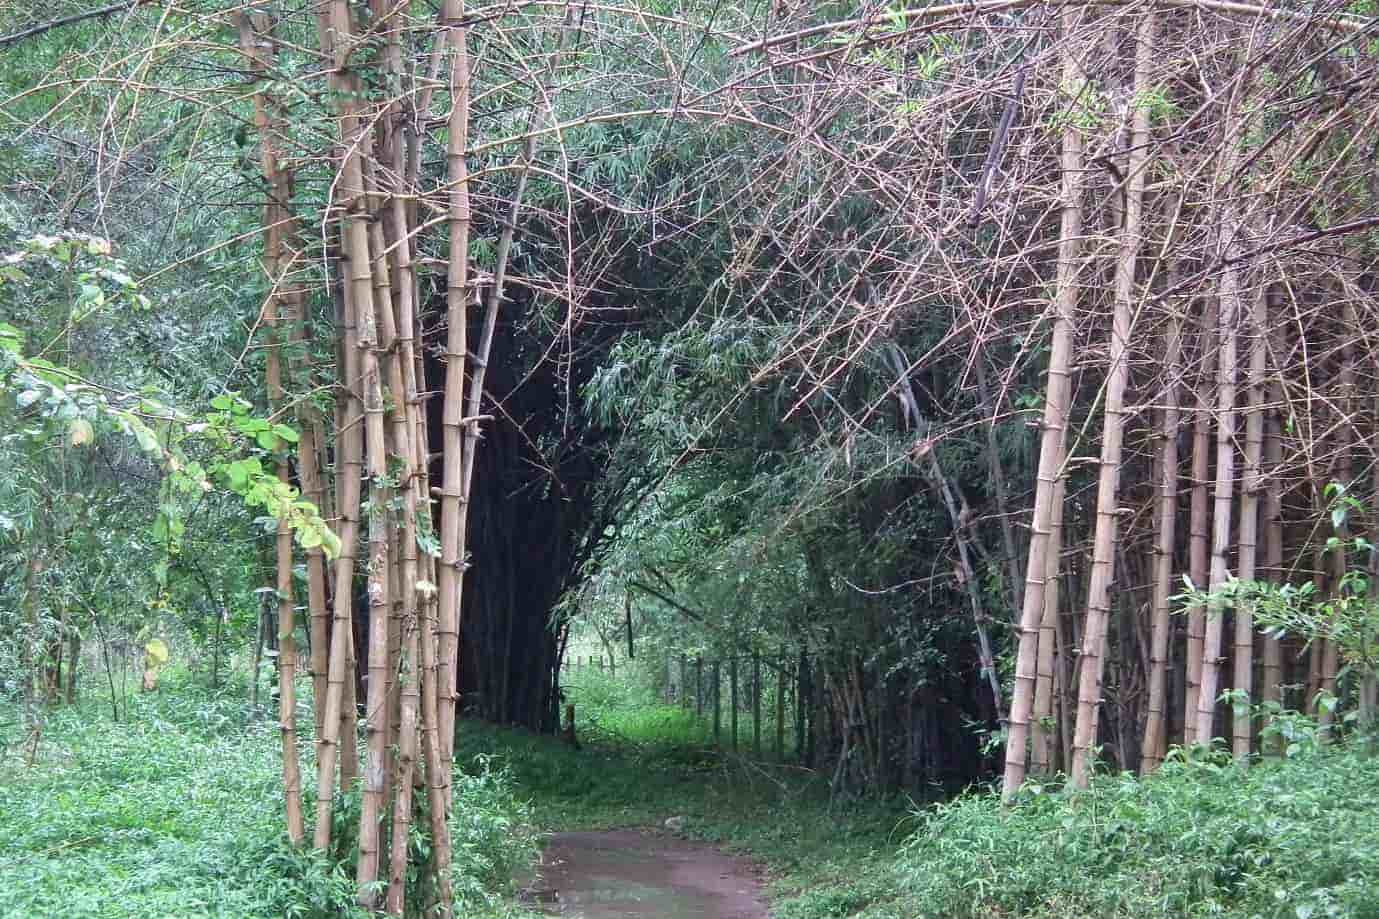 Bamboo groves in Nisargadhama Coorg